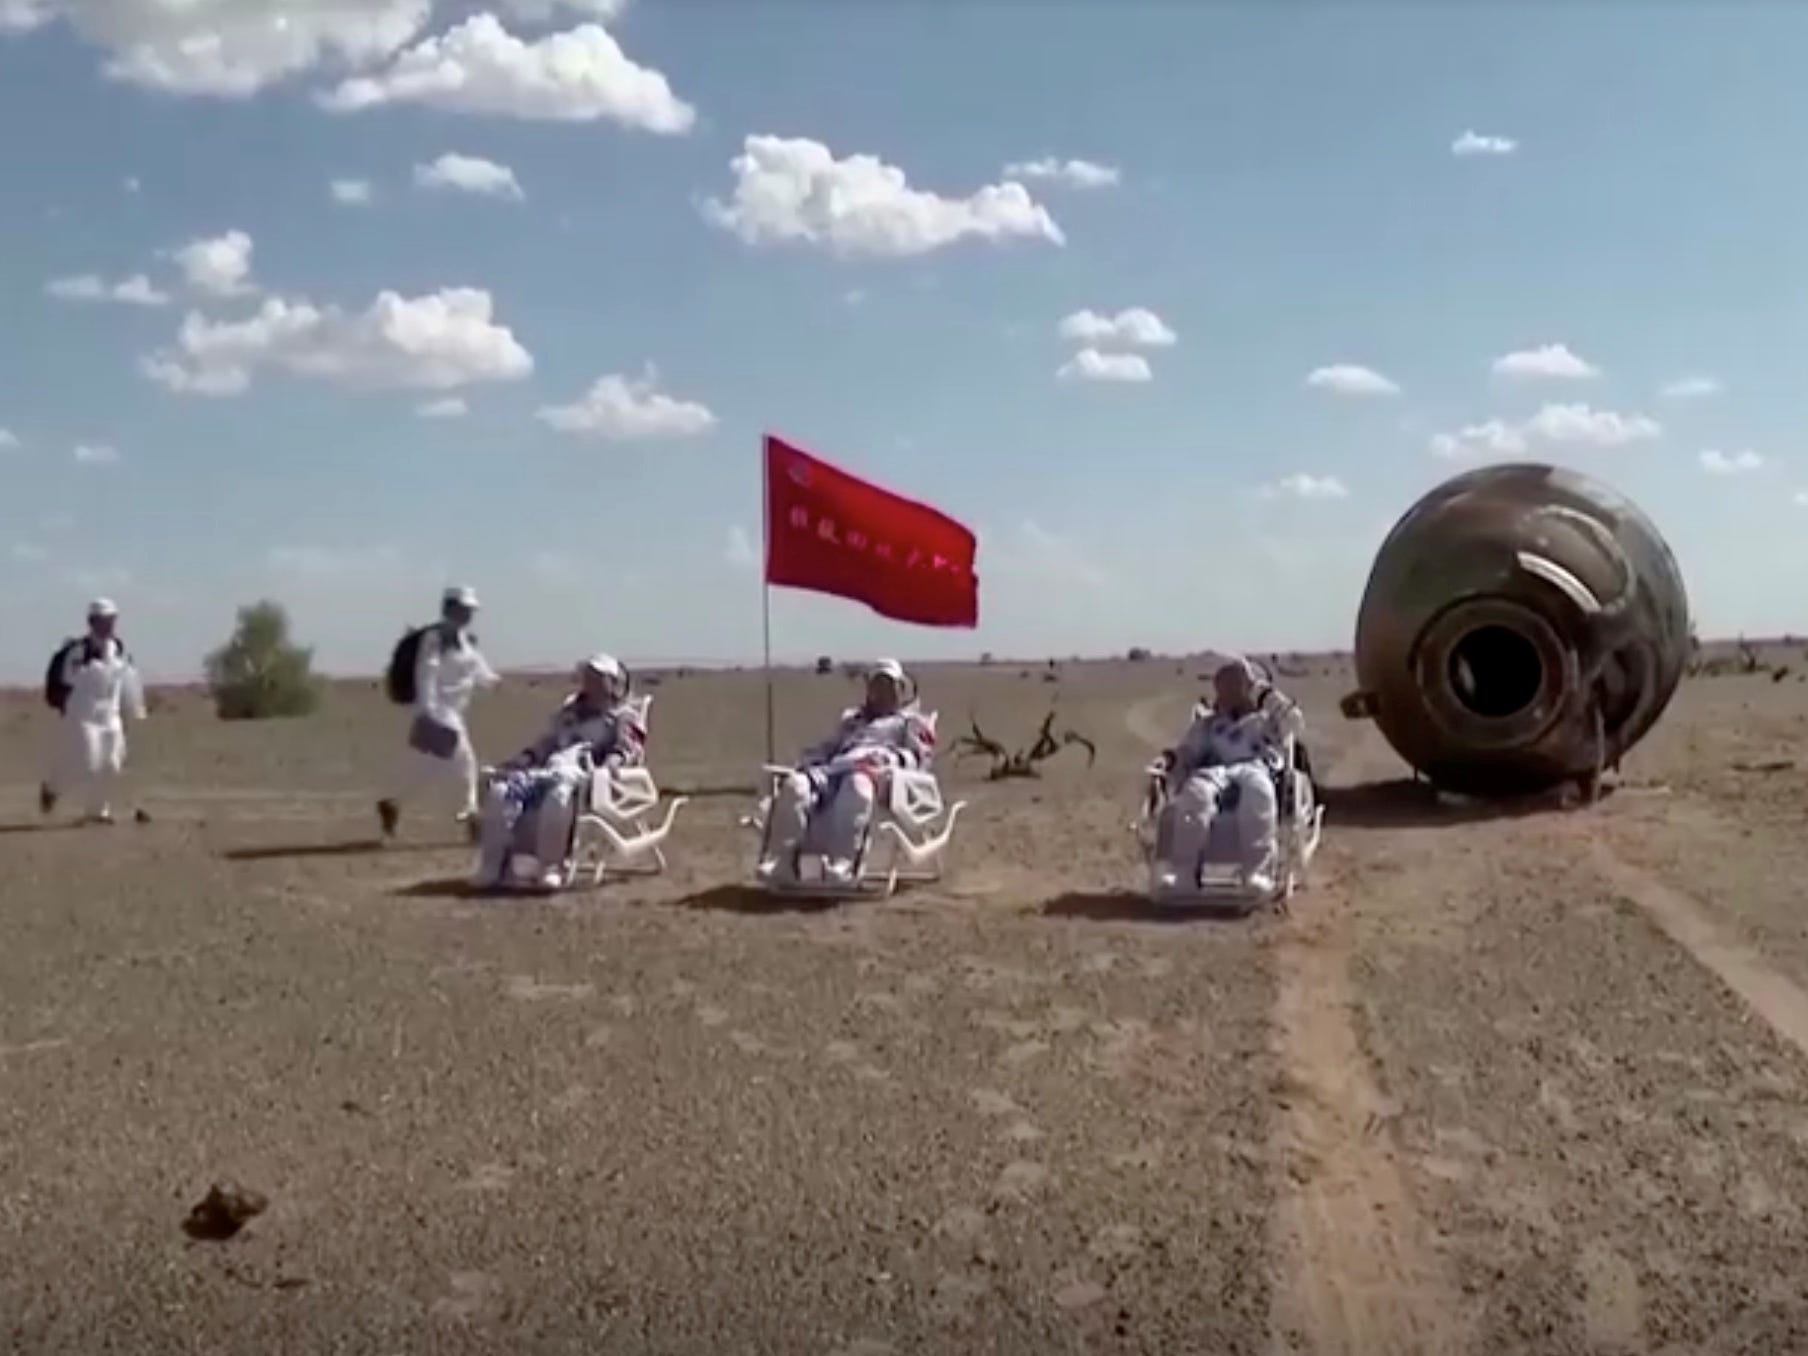 chinese astronauts sit in chairs next to charred spaceship after landing in mongolia desert from space station mission